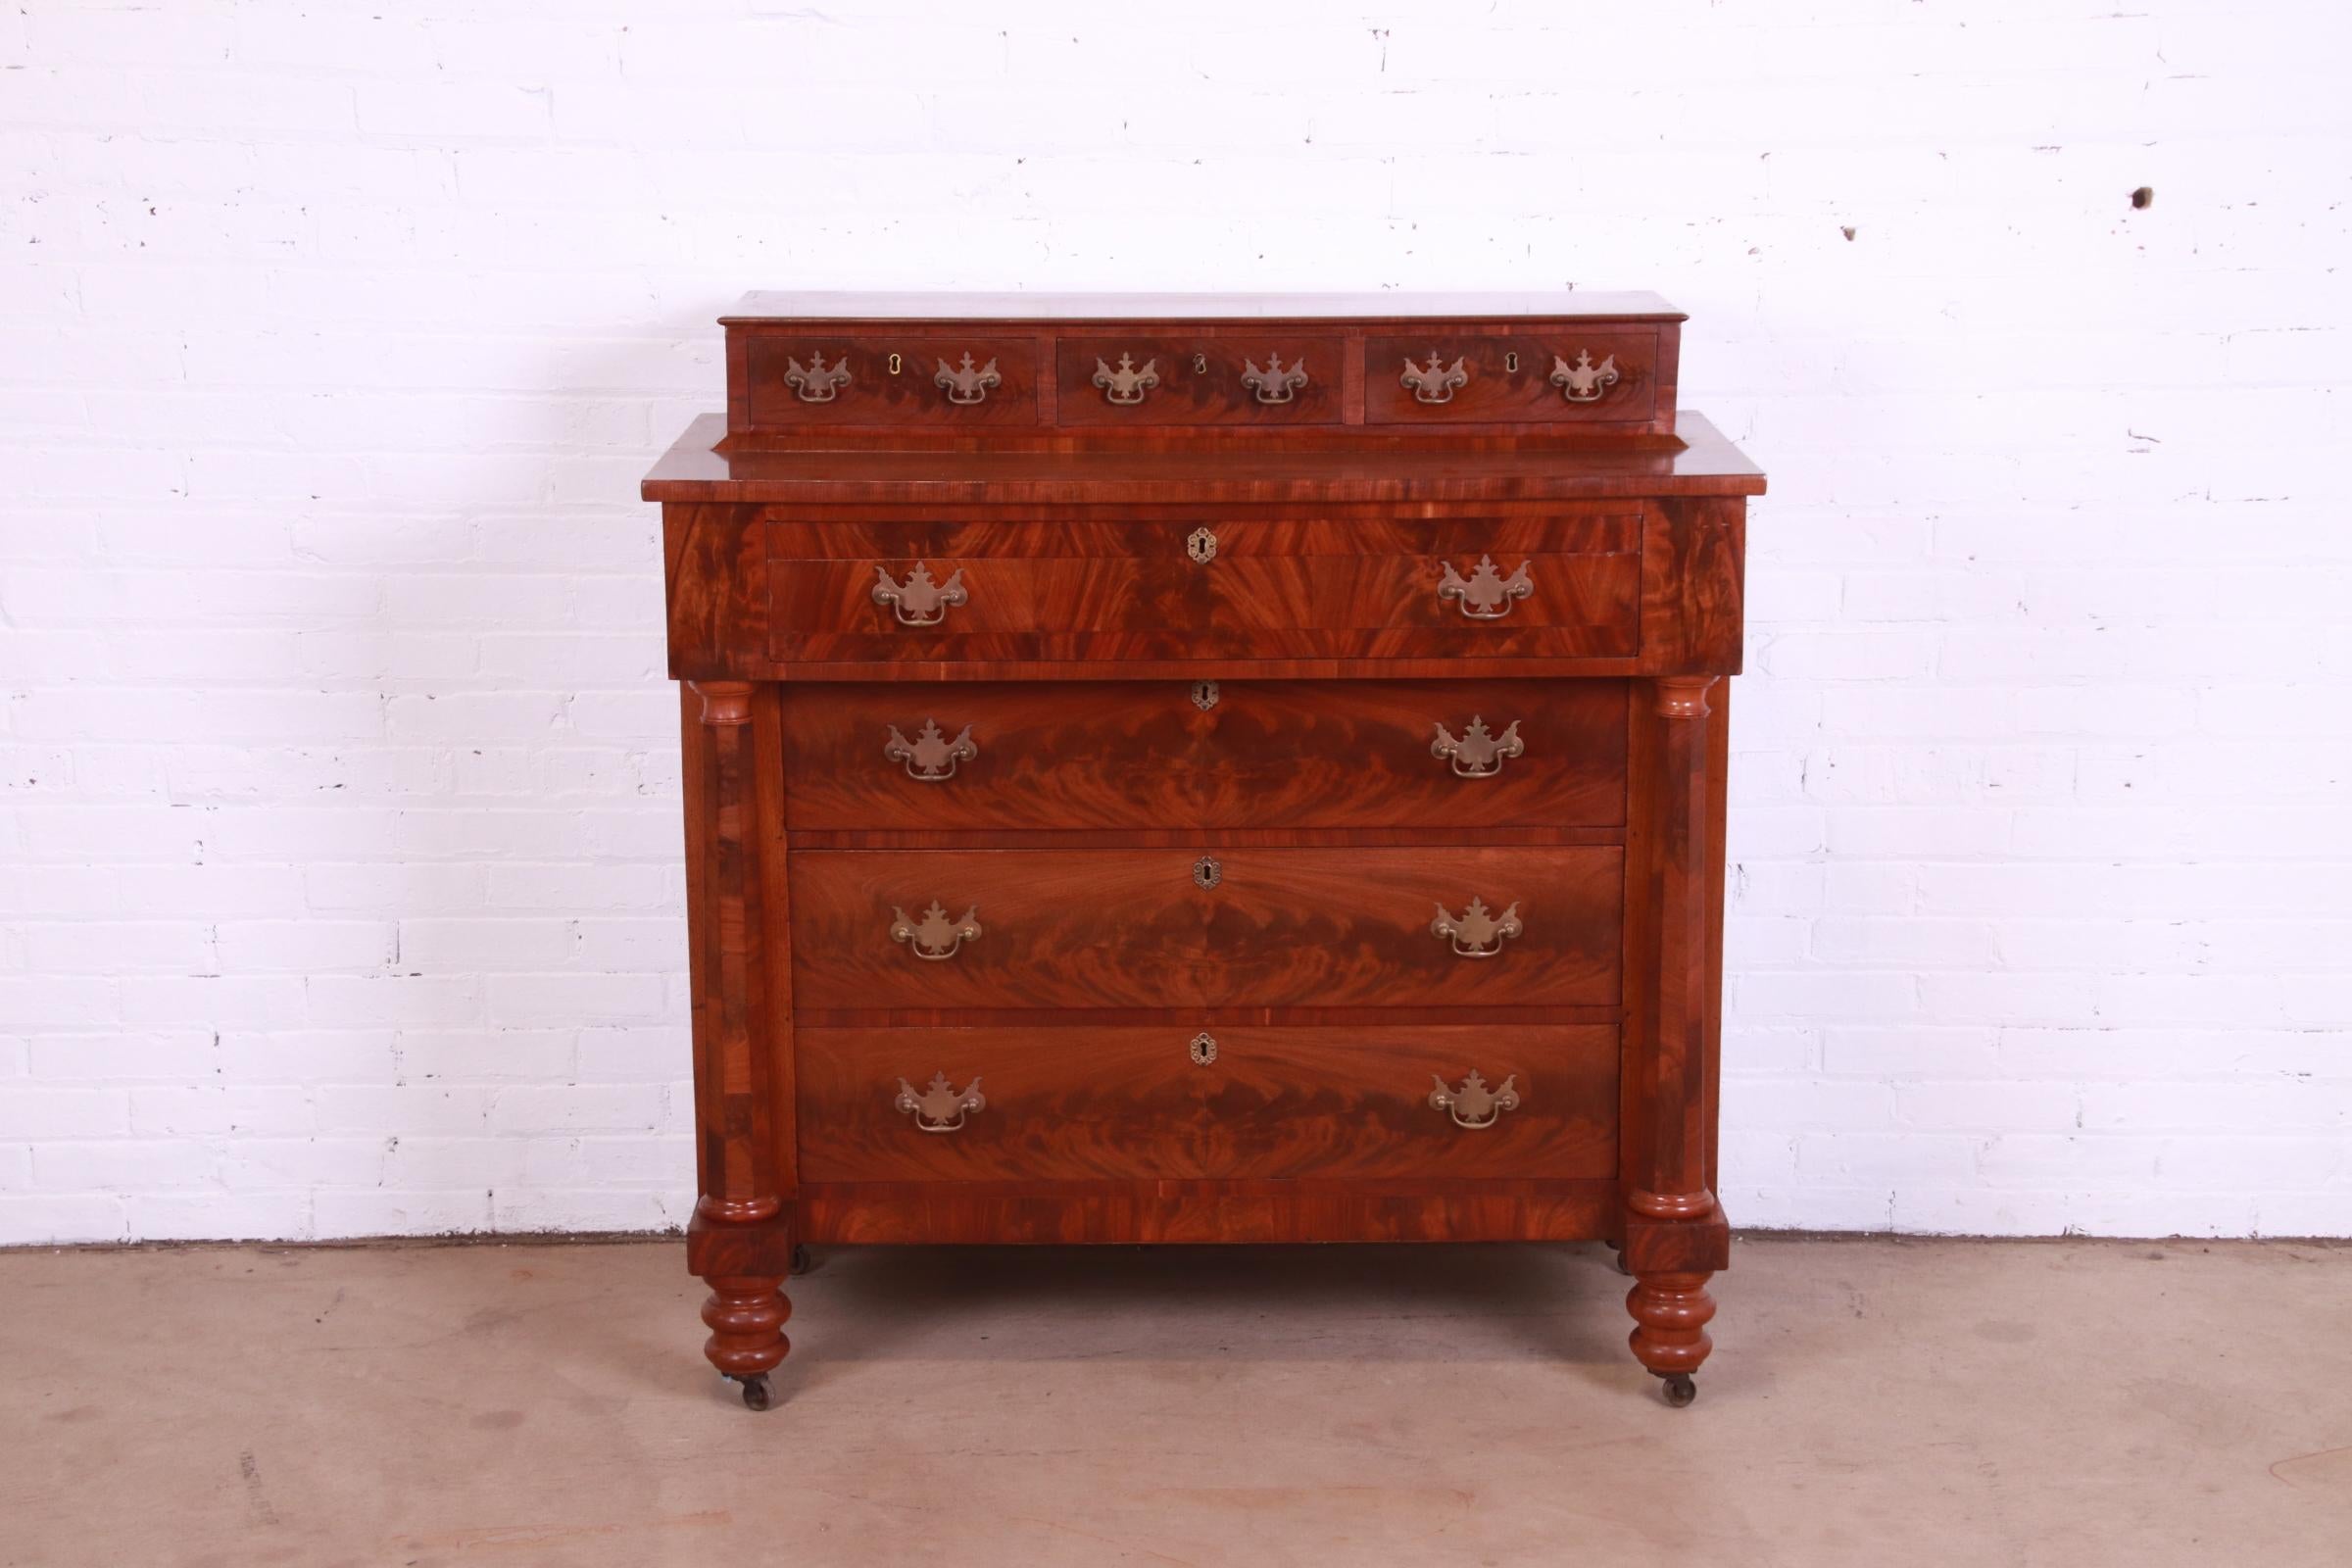 A gorgeous antique American Empire seven-drawer dresser or chest of drawers

USA, Circa 1850s

Stunning book-matched flame mahogany, with brass hardware.

Measures: 45